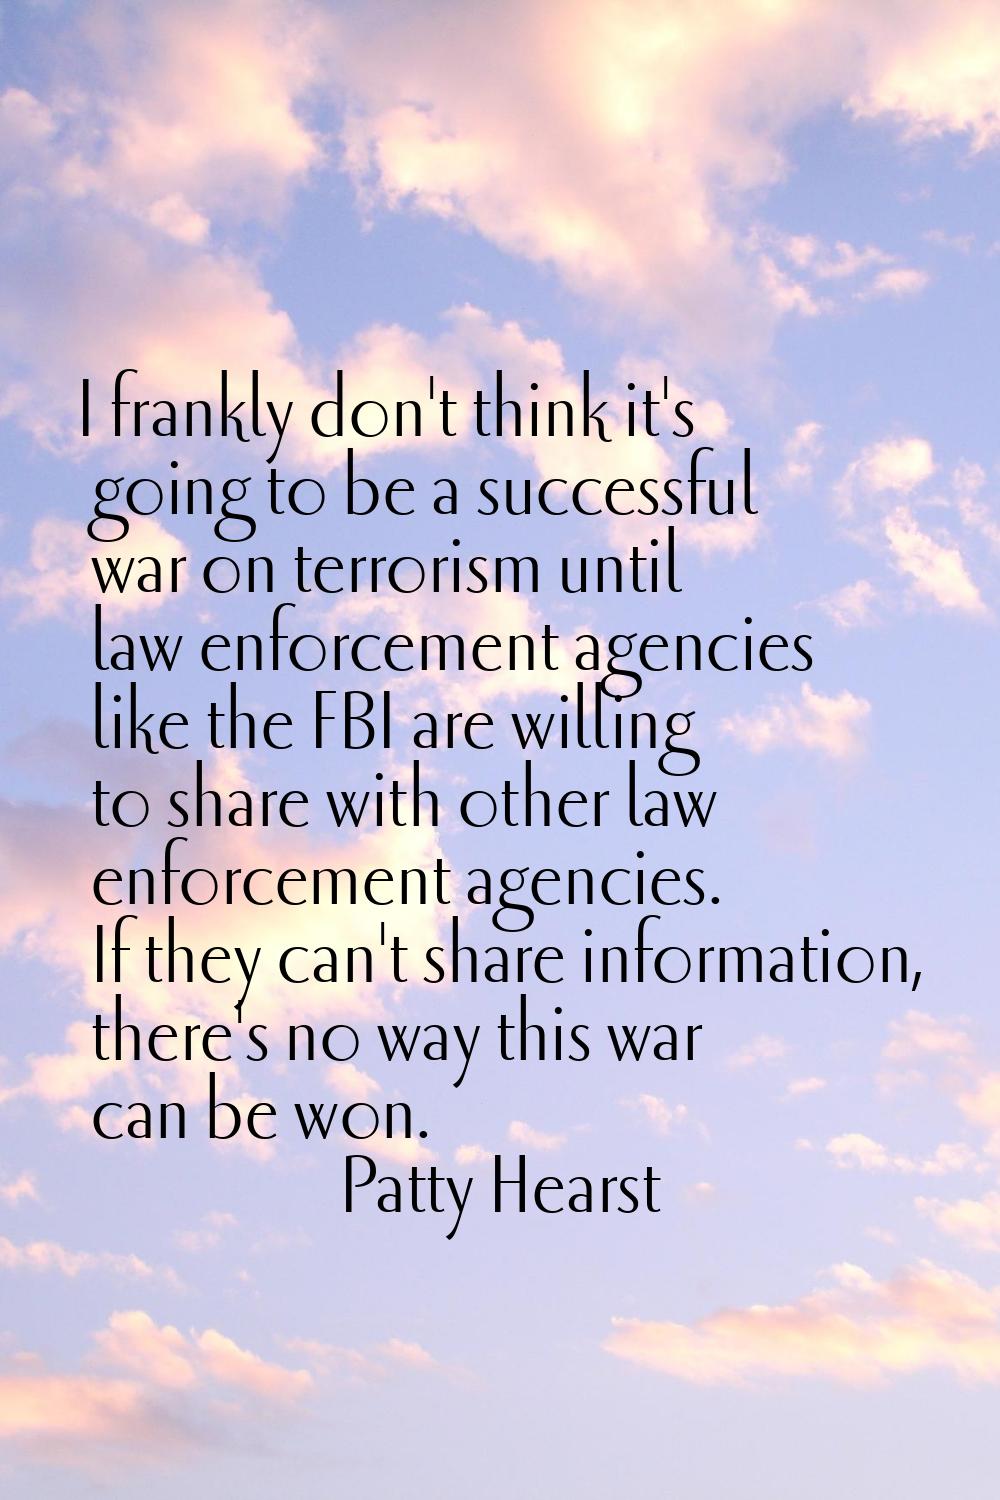 I frankly don't think it's going to be a successful war on terrorism until law enforcement agencies